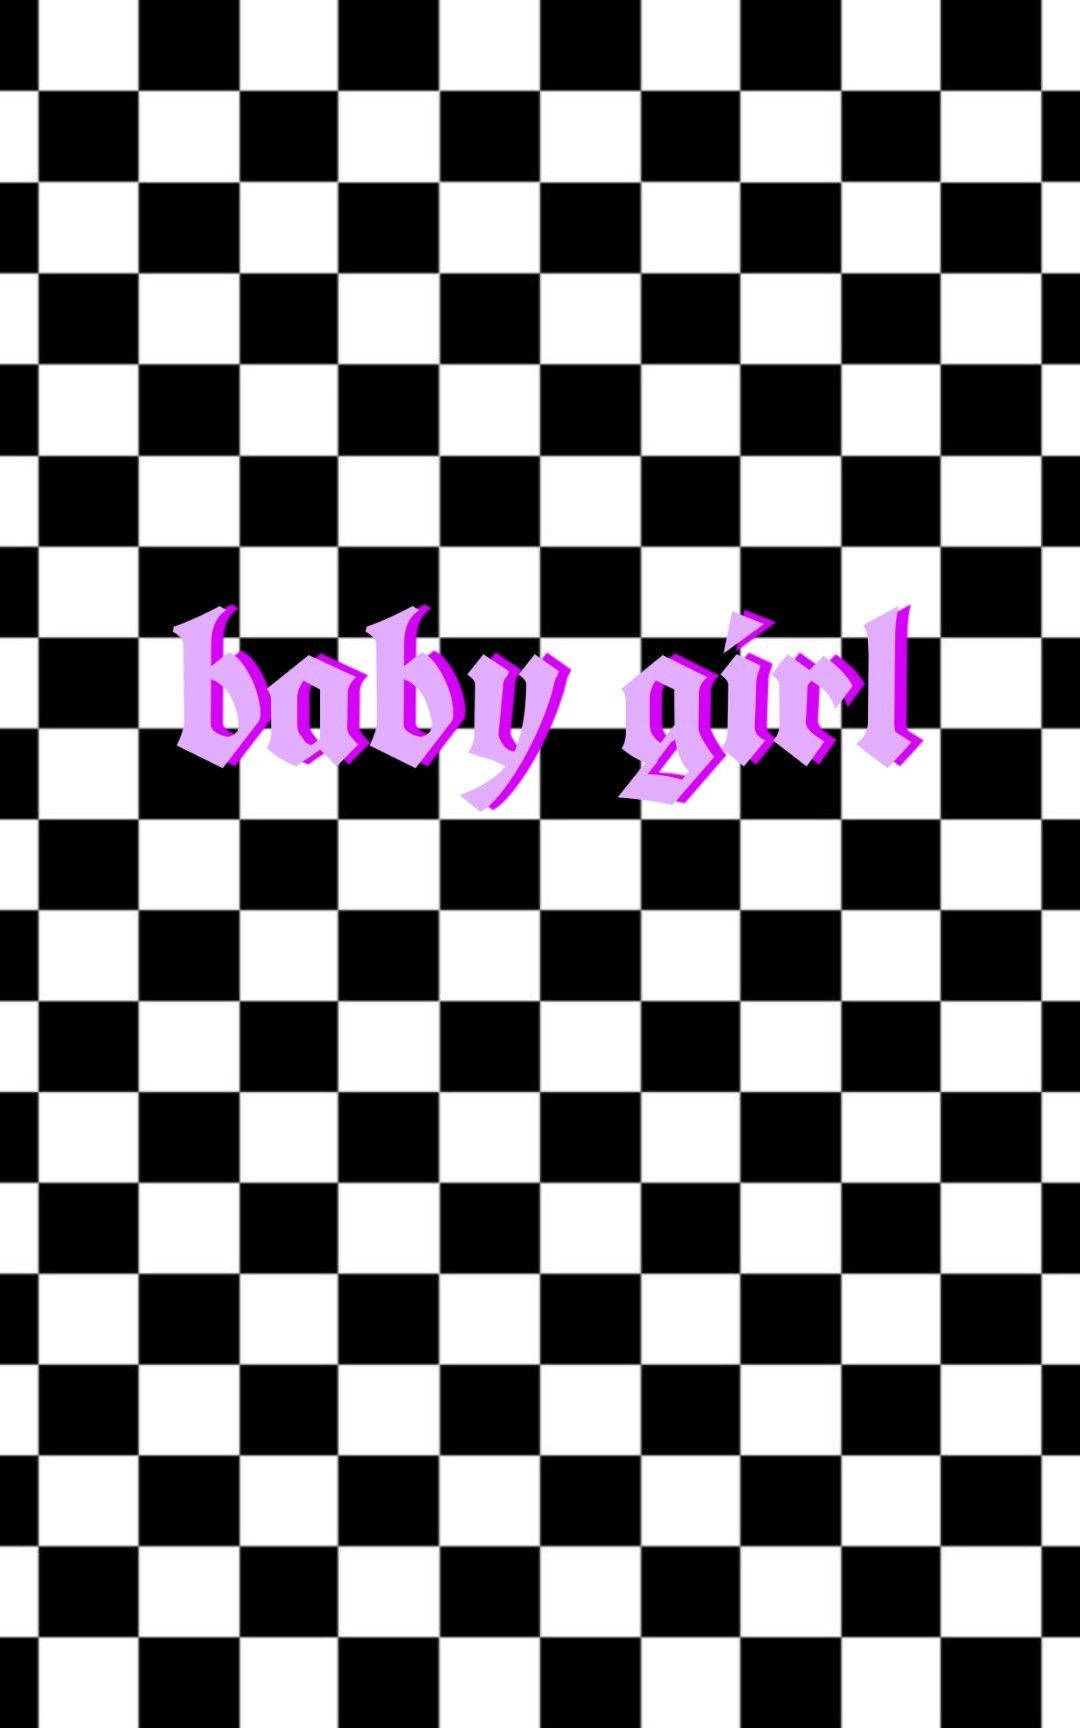 Purple Baby Girl Text On Black And White Squares Wallpaper